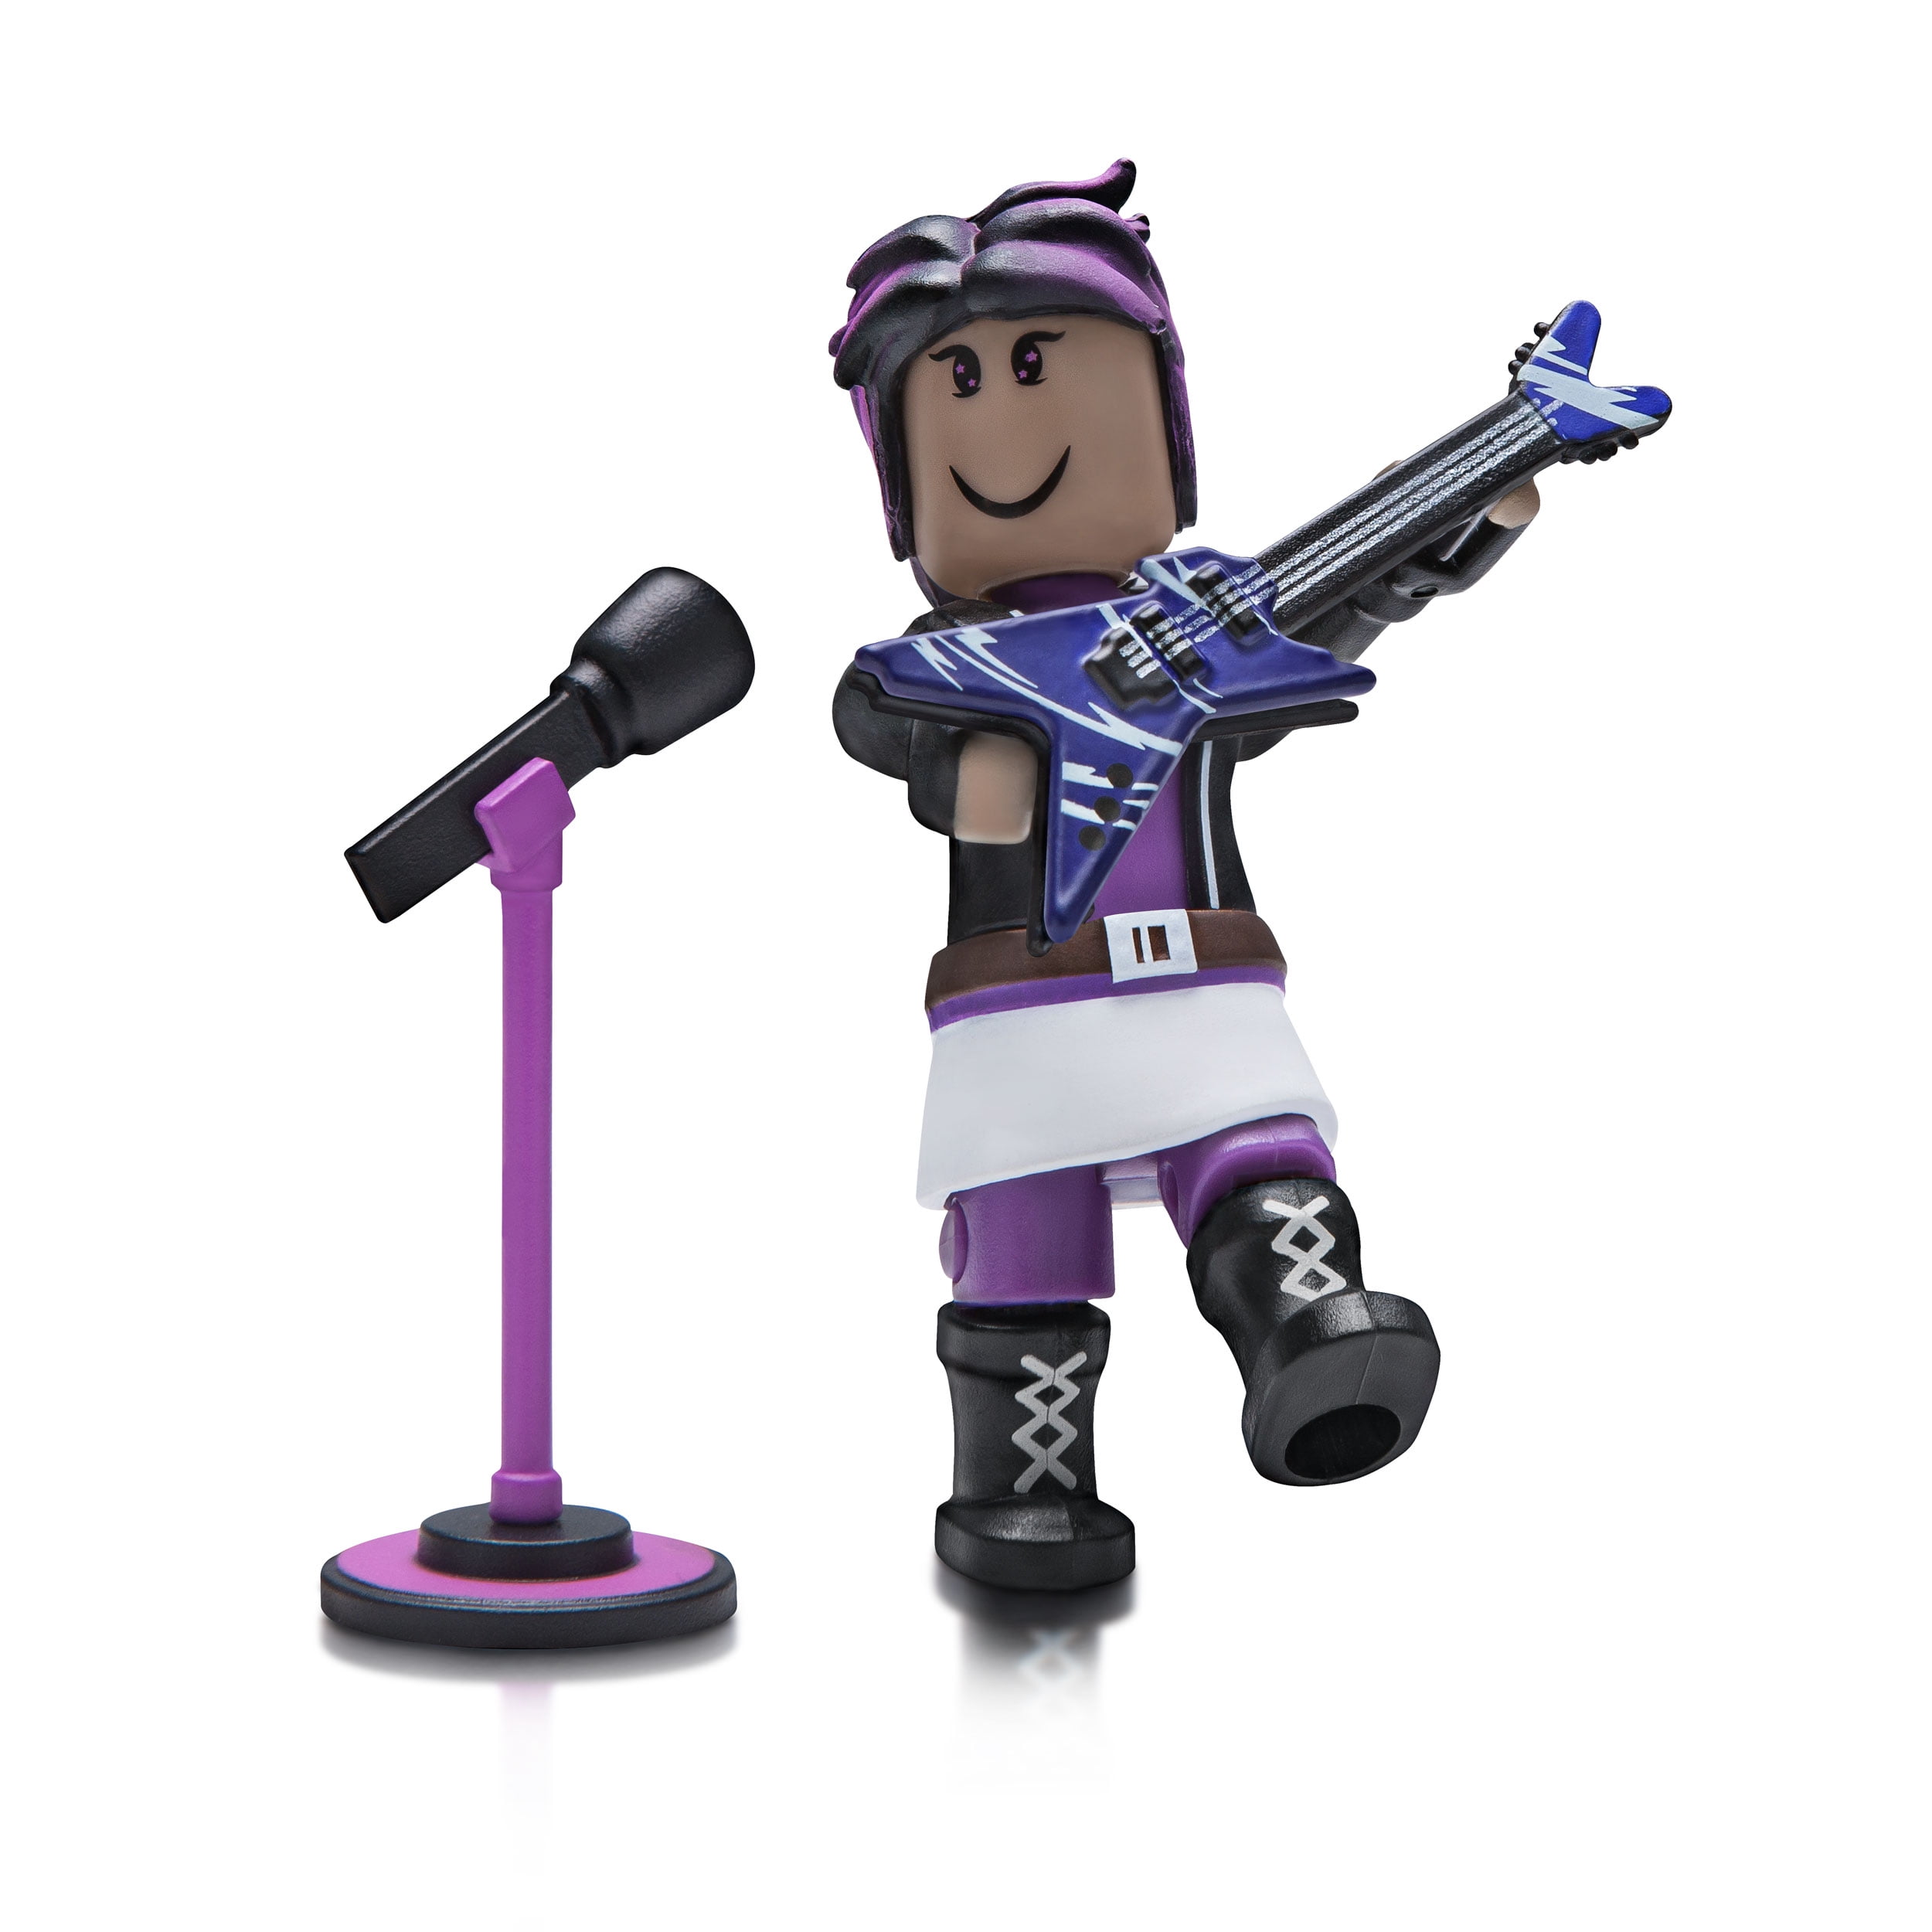 Roblox Celebrity Collection Single Figure Pack Styles May Vary Includes 1 Exclusive Virtual Item Walmart Com Walmart Com - roblox roblox celebrity collection fashion icons mix match set from walmart parentingcom shop